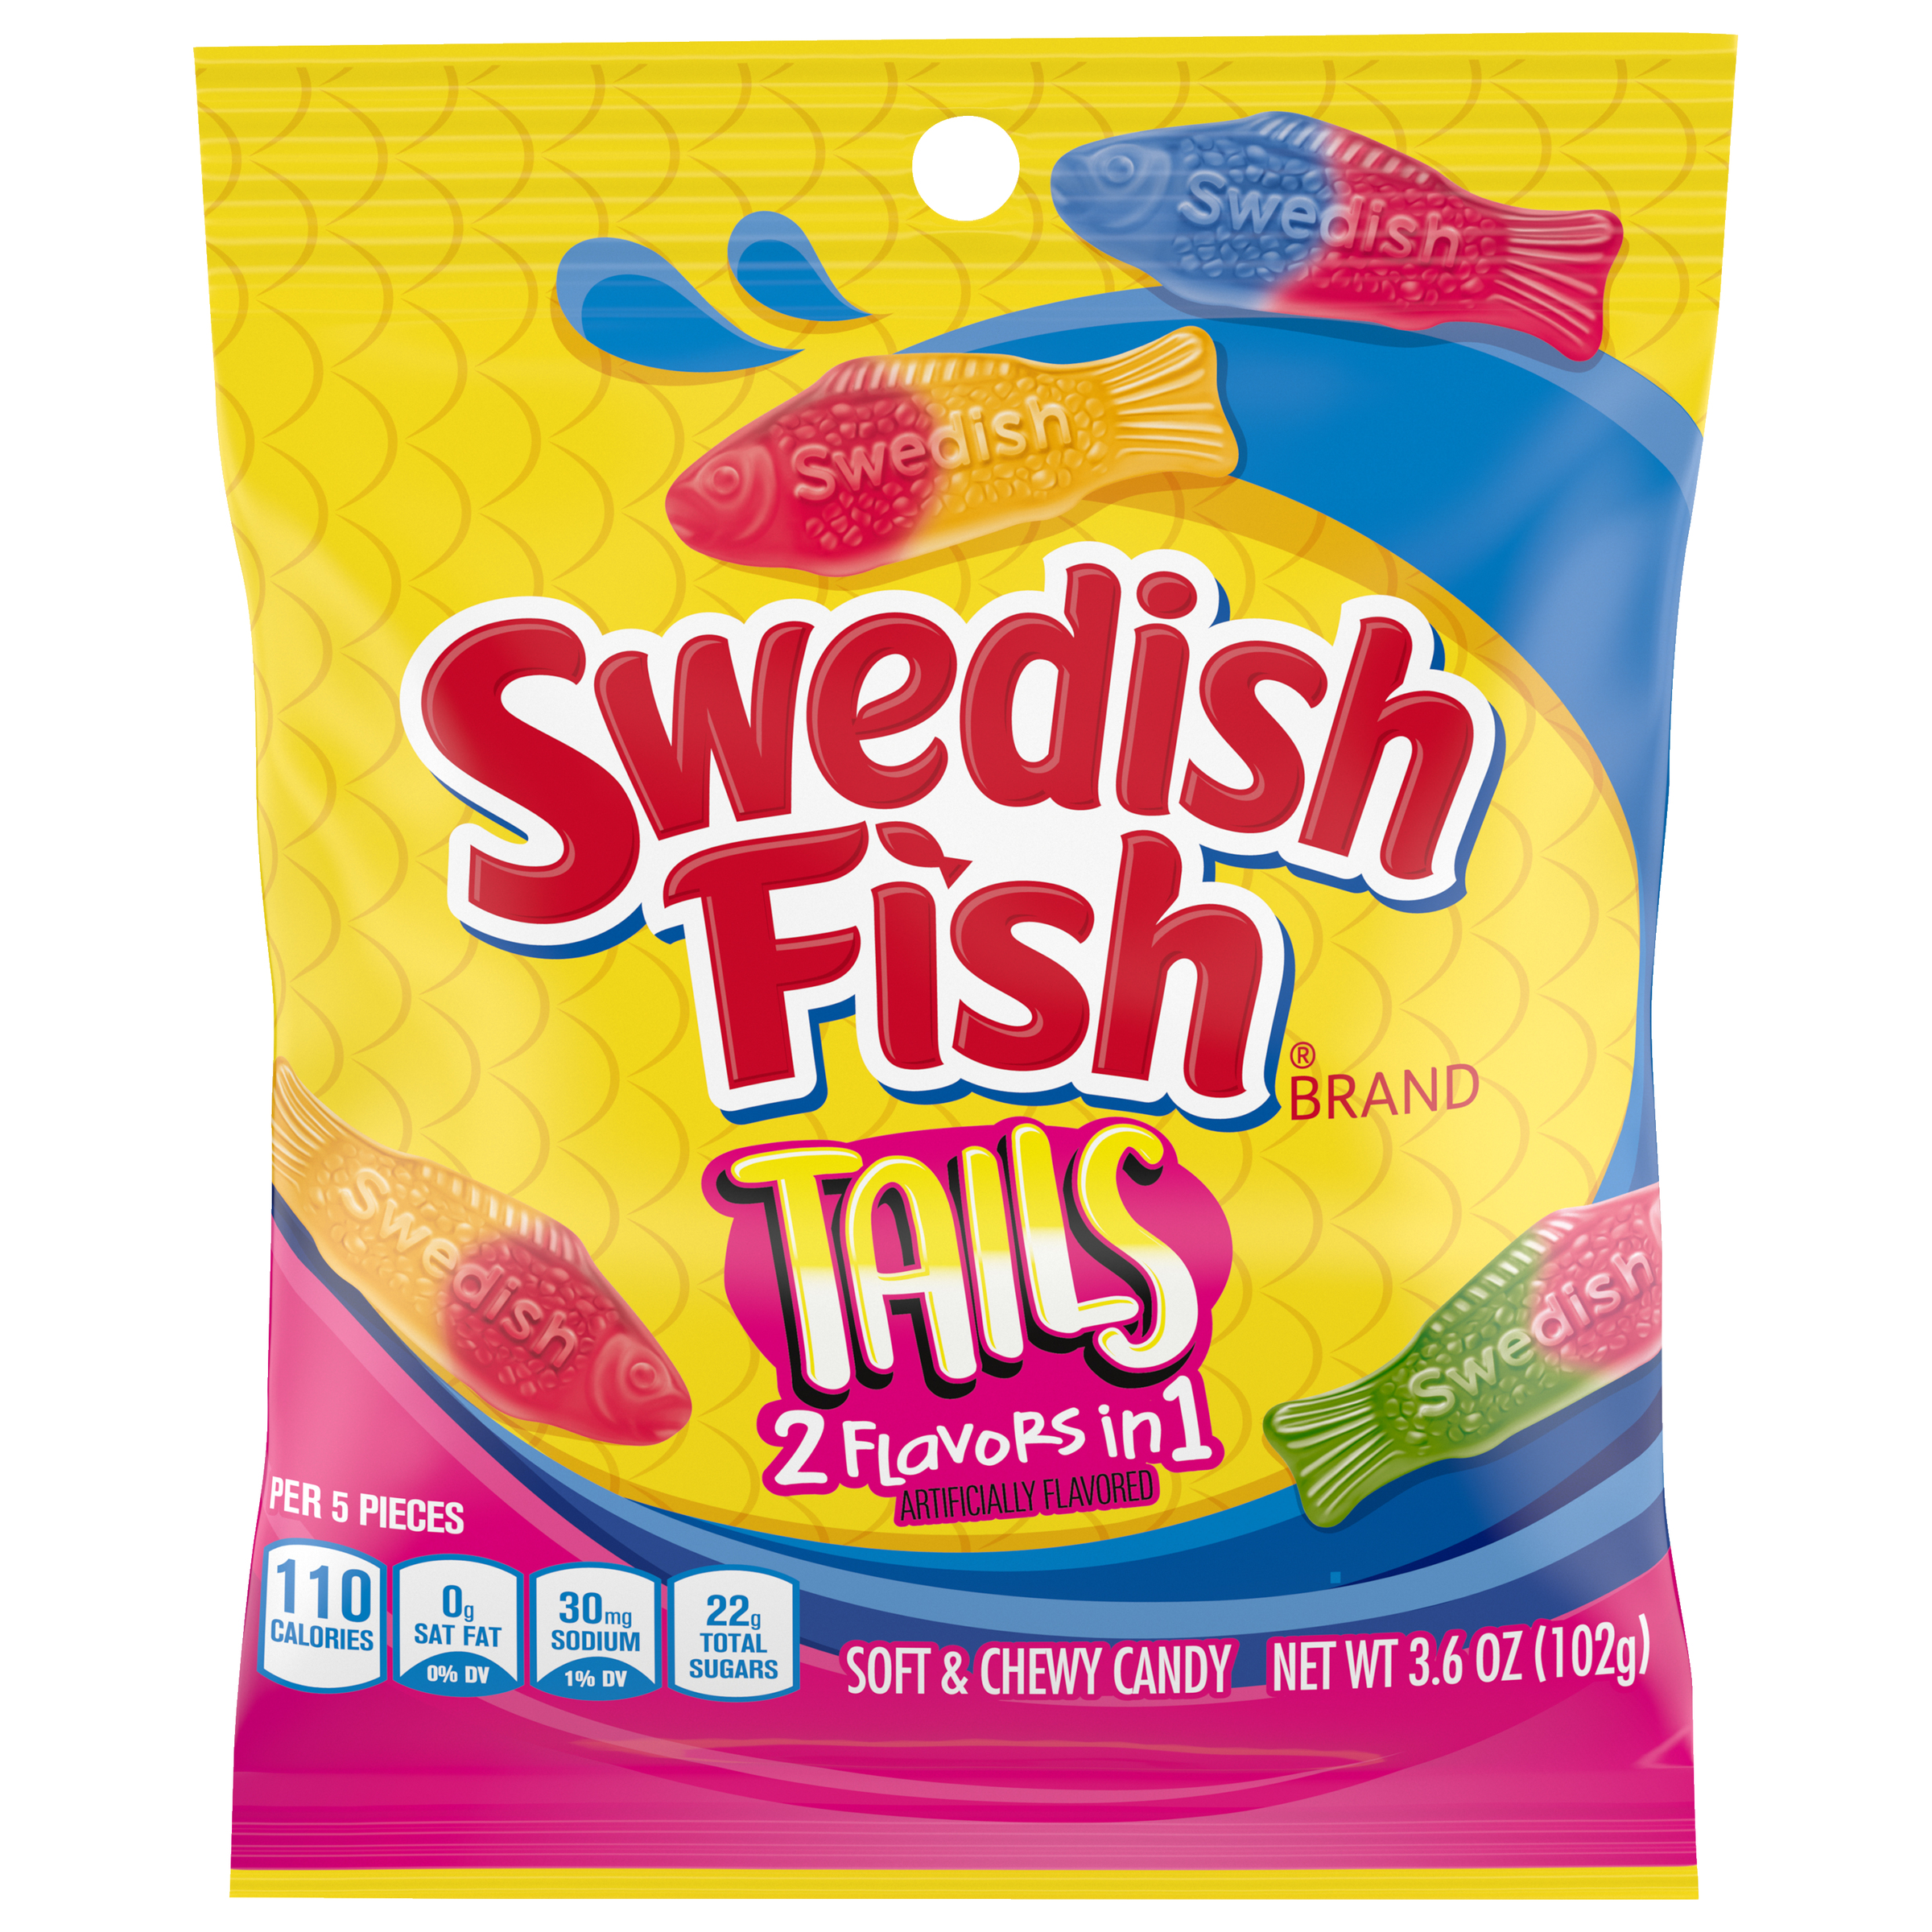 SWEDISH FISH Tails 2 Flavors in 1 Soft & Chewy Candy, 3.6 oz